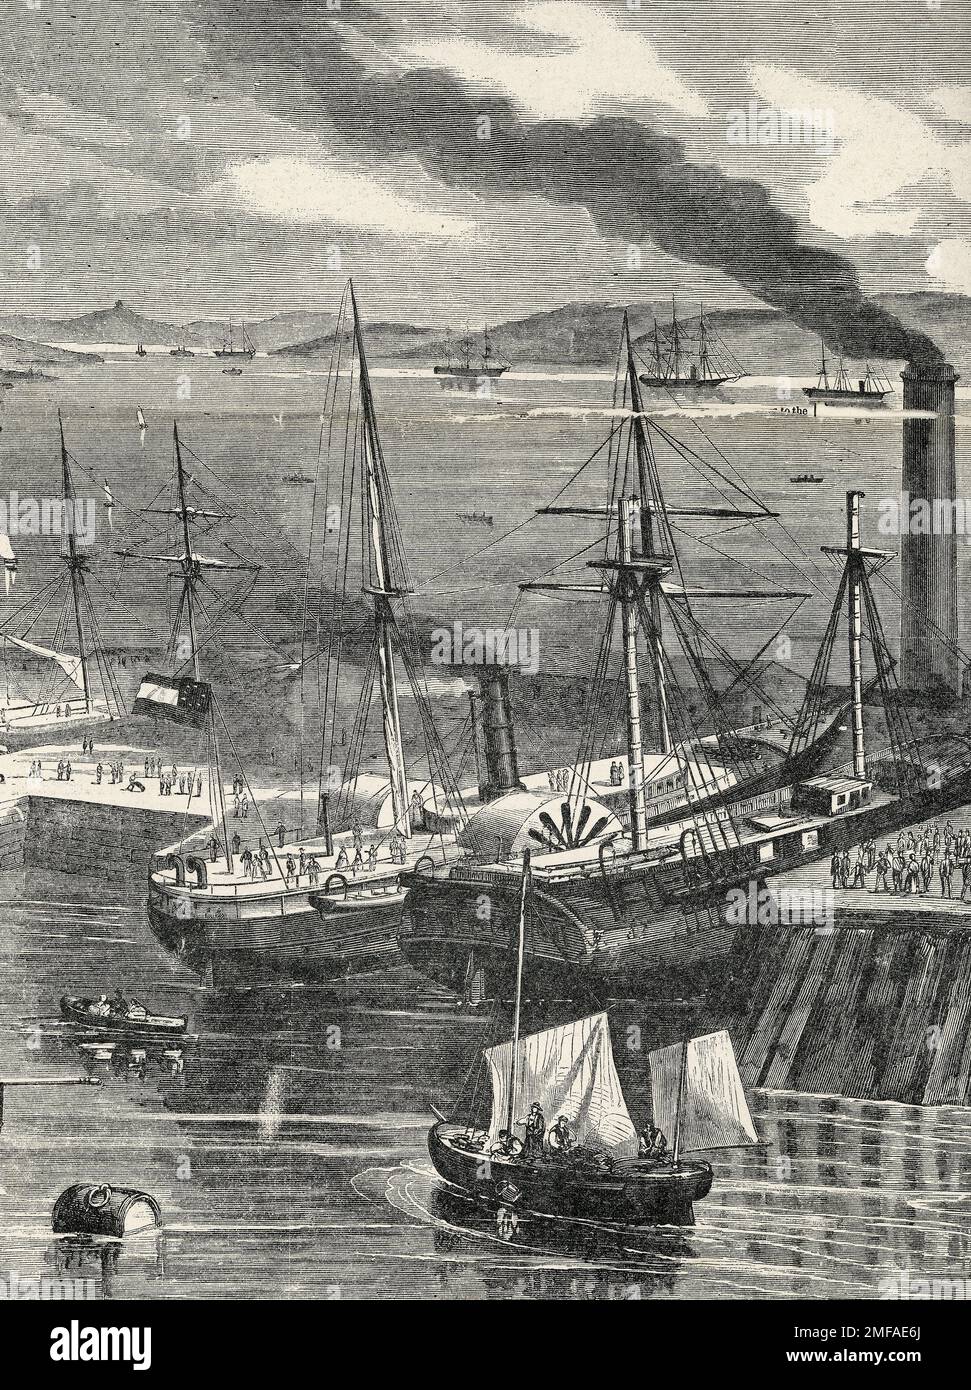 The Nashville and Tuscarora at Southampton, England durind the American Civil War, 1862 Stock Photo